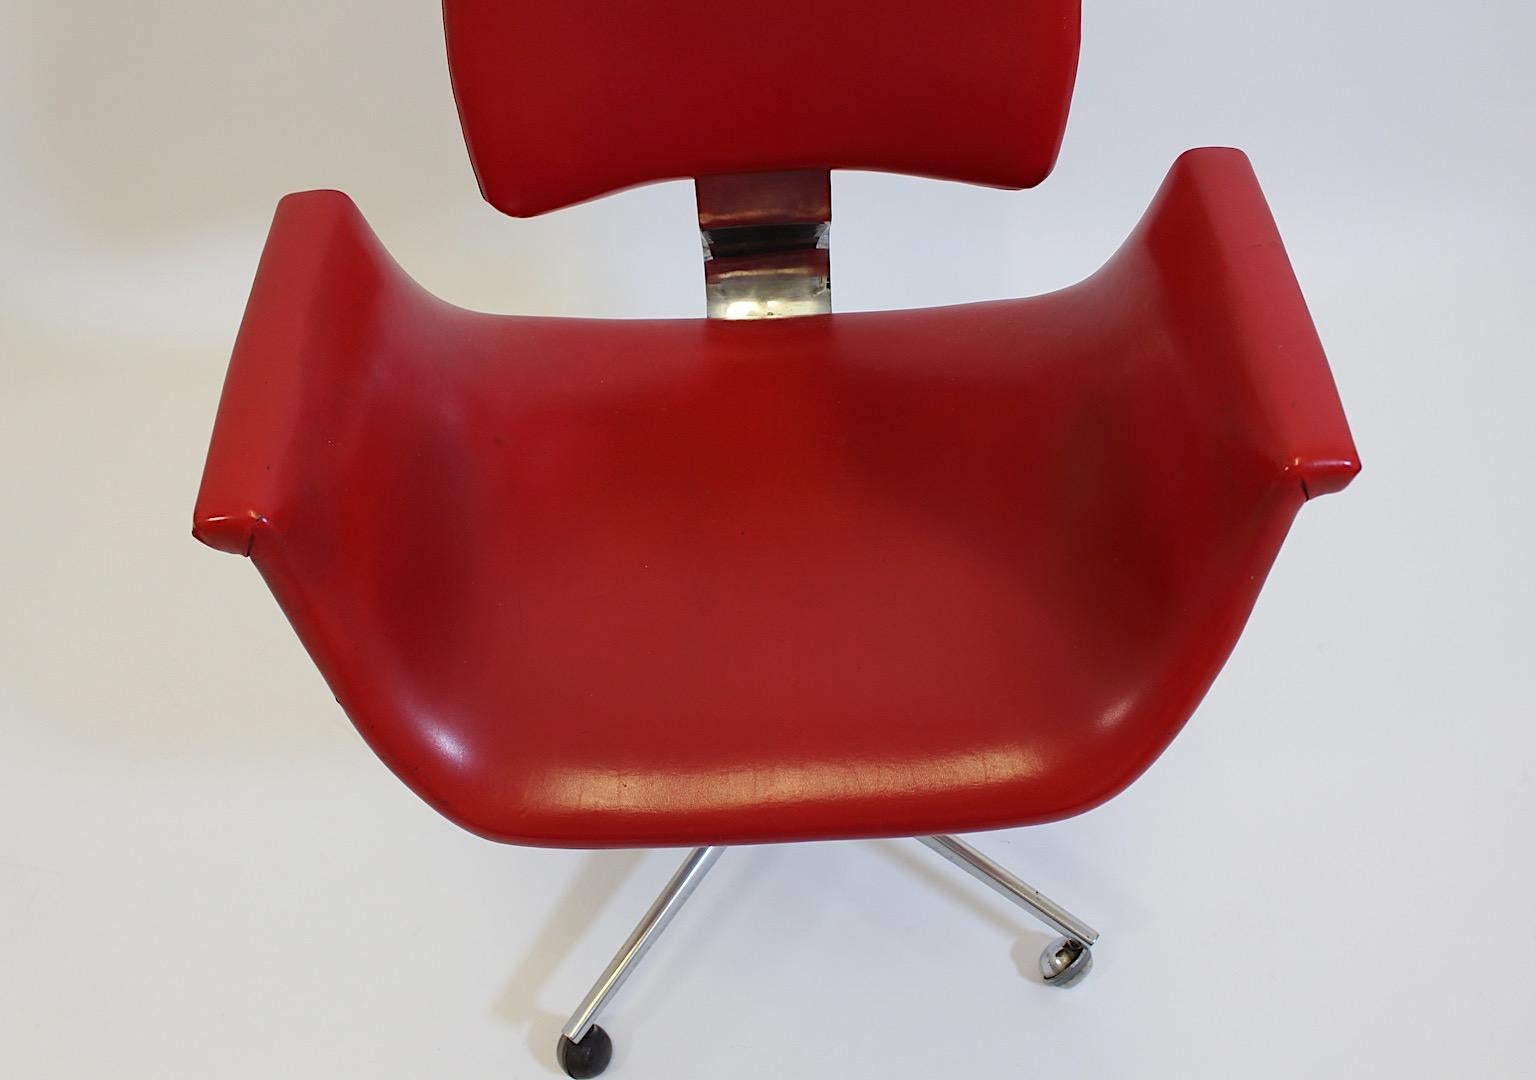 Space Age Vintage Red Faux Leather Chrome Metal Office Chair Desk Chair 1960s In Good Condition For Sale In Vienna, AT